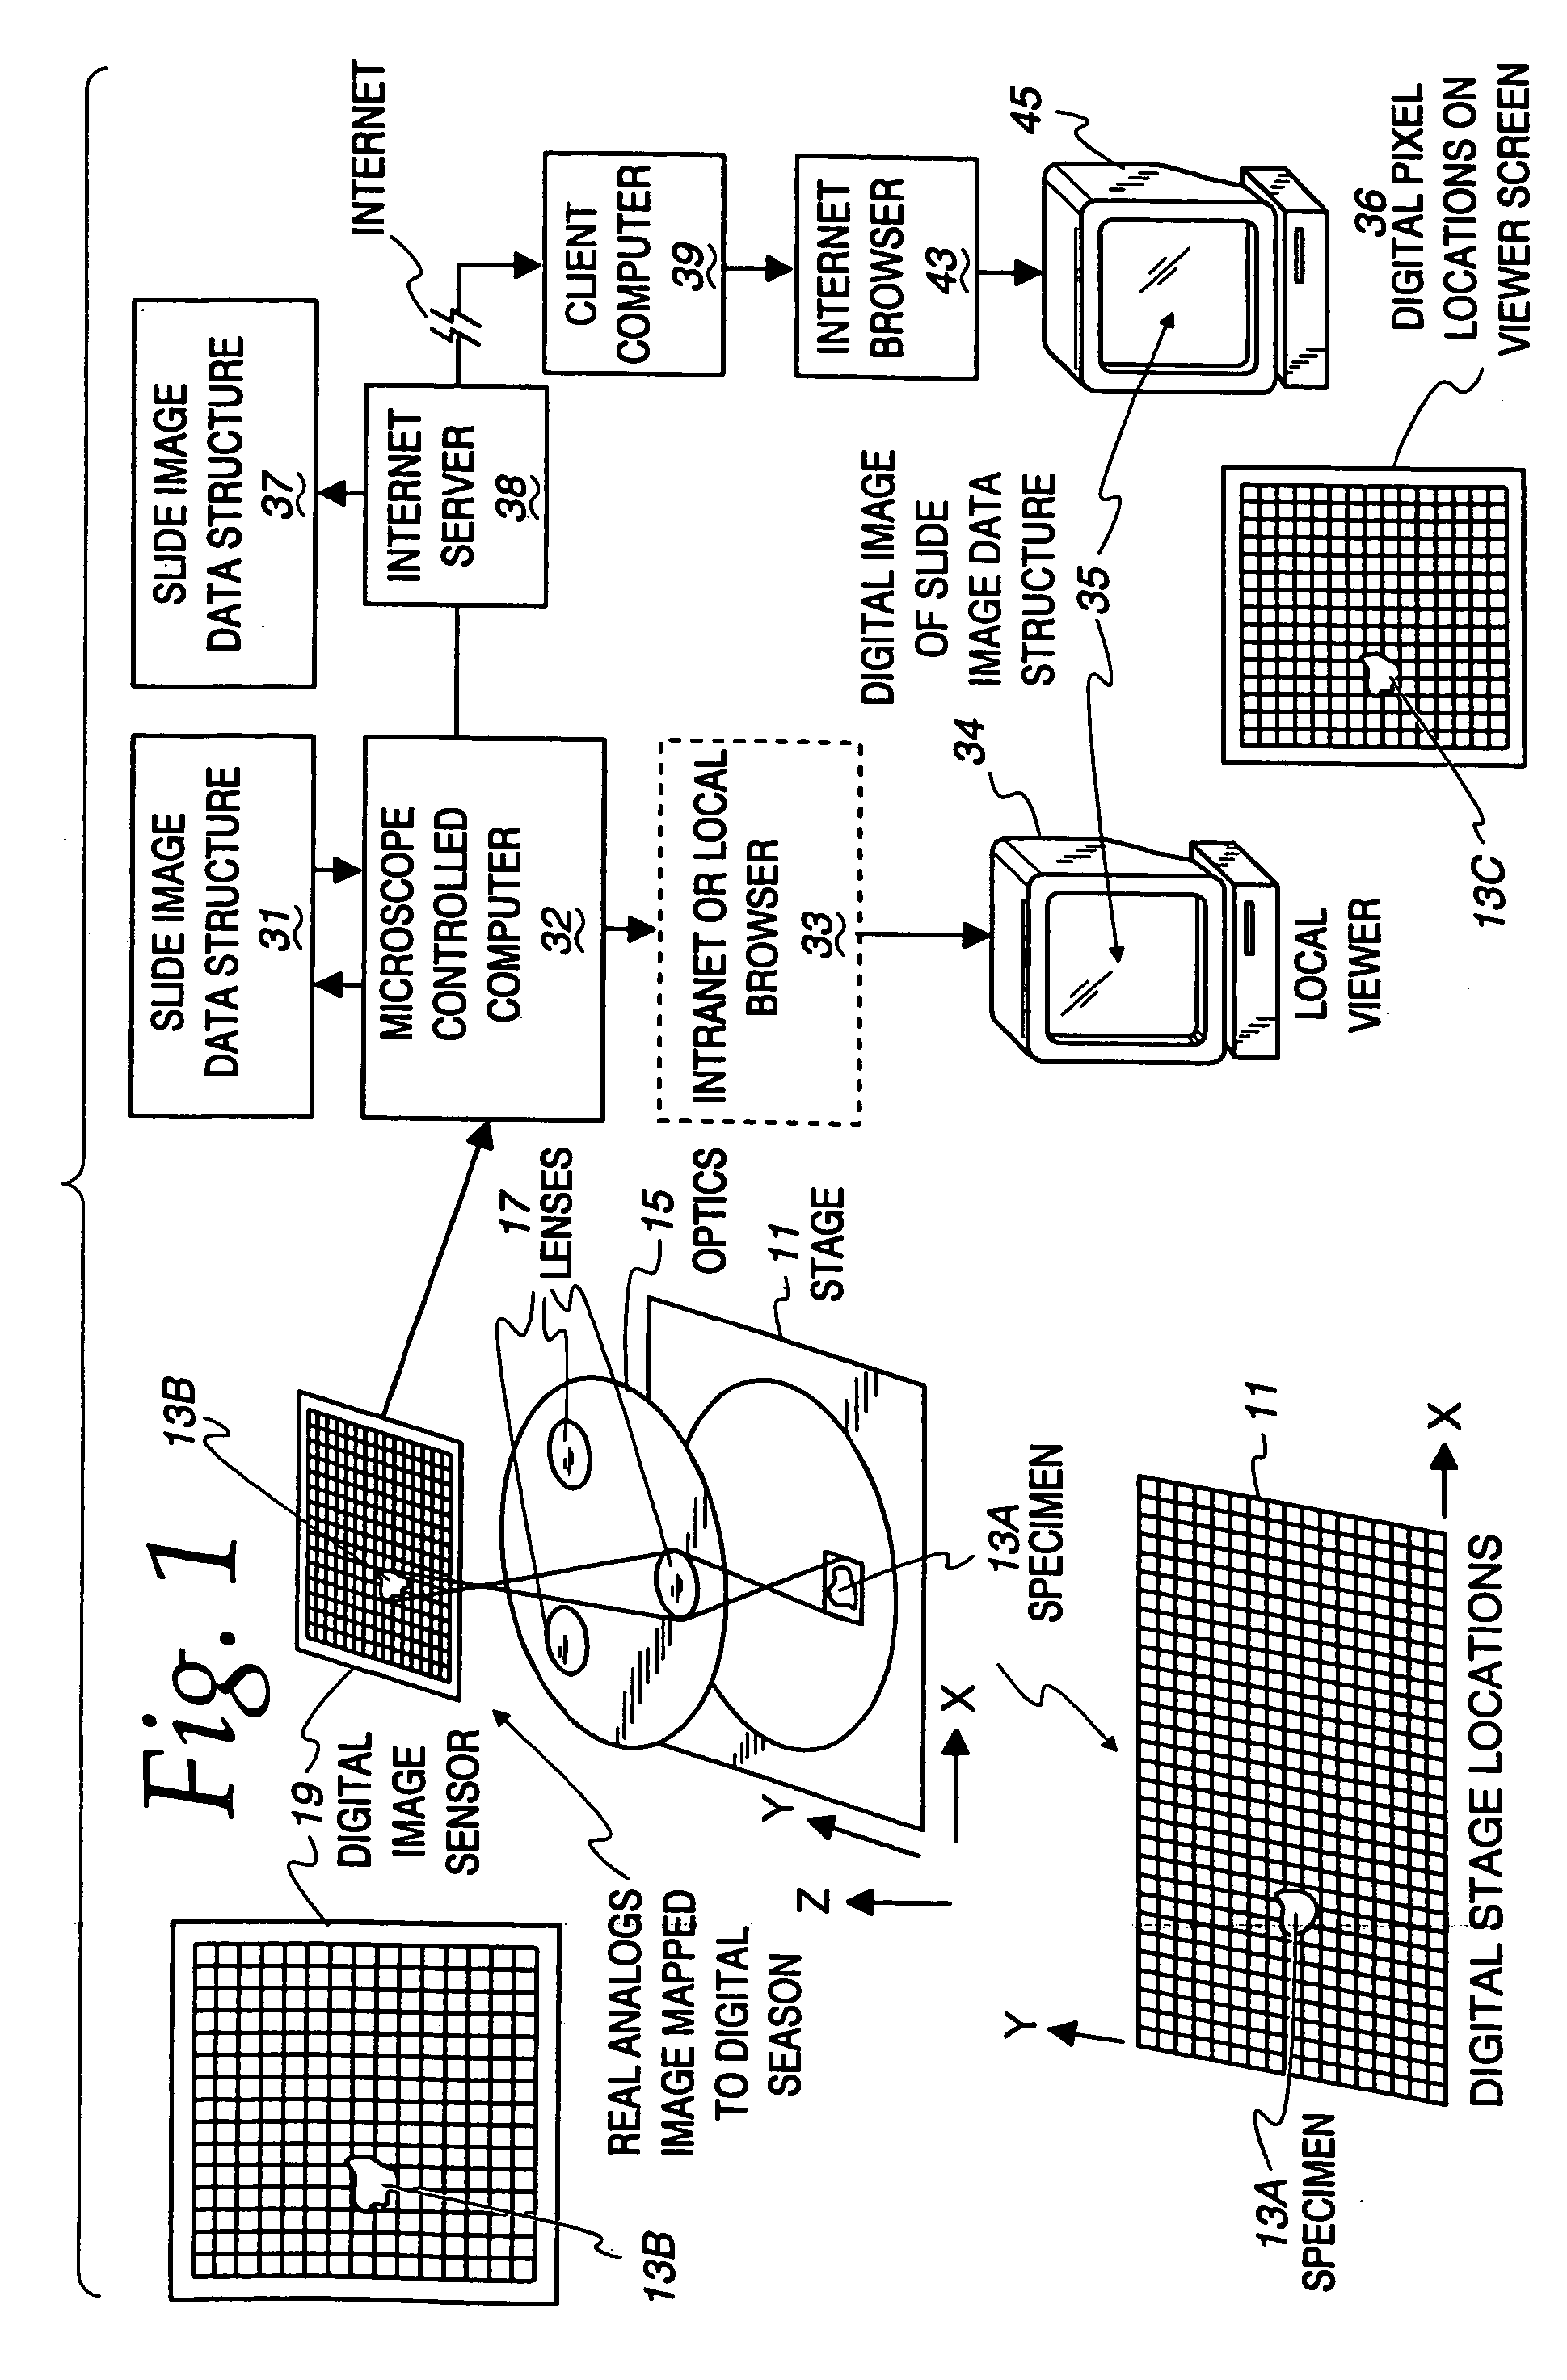 Method and apparatus for creating a virtual microscope slide